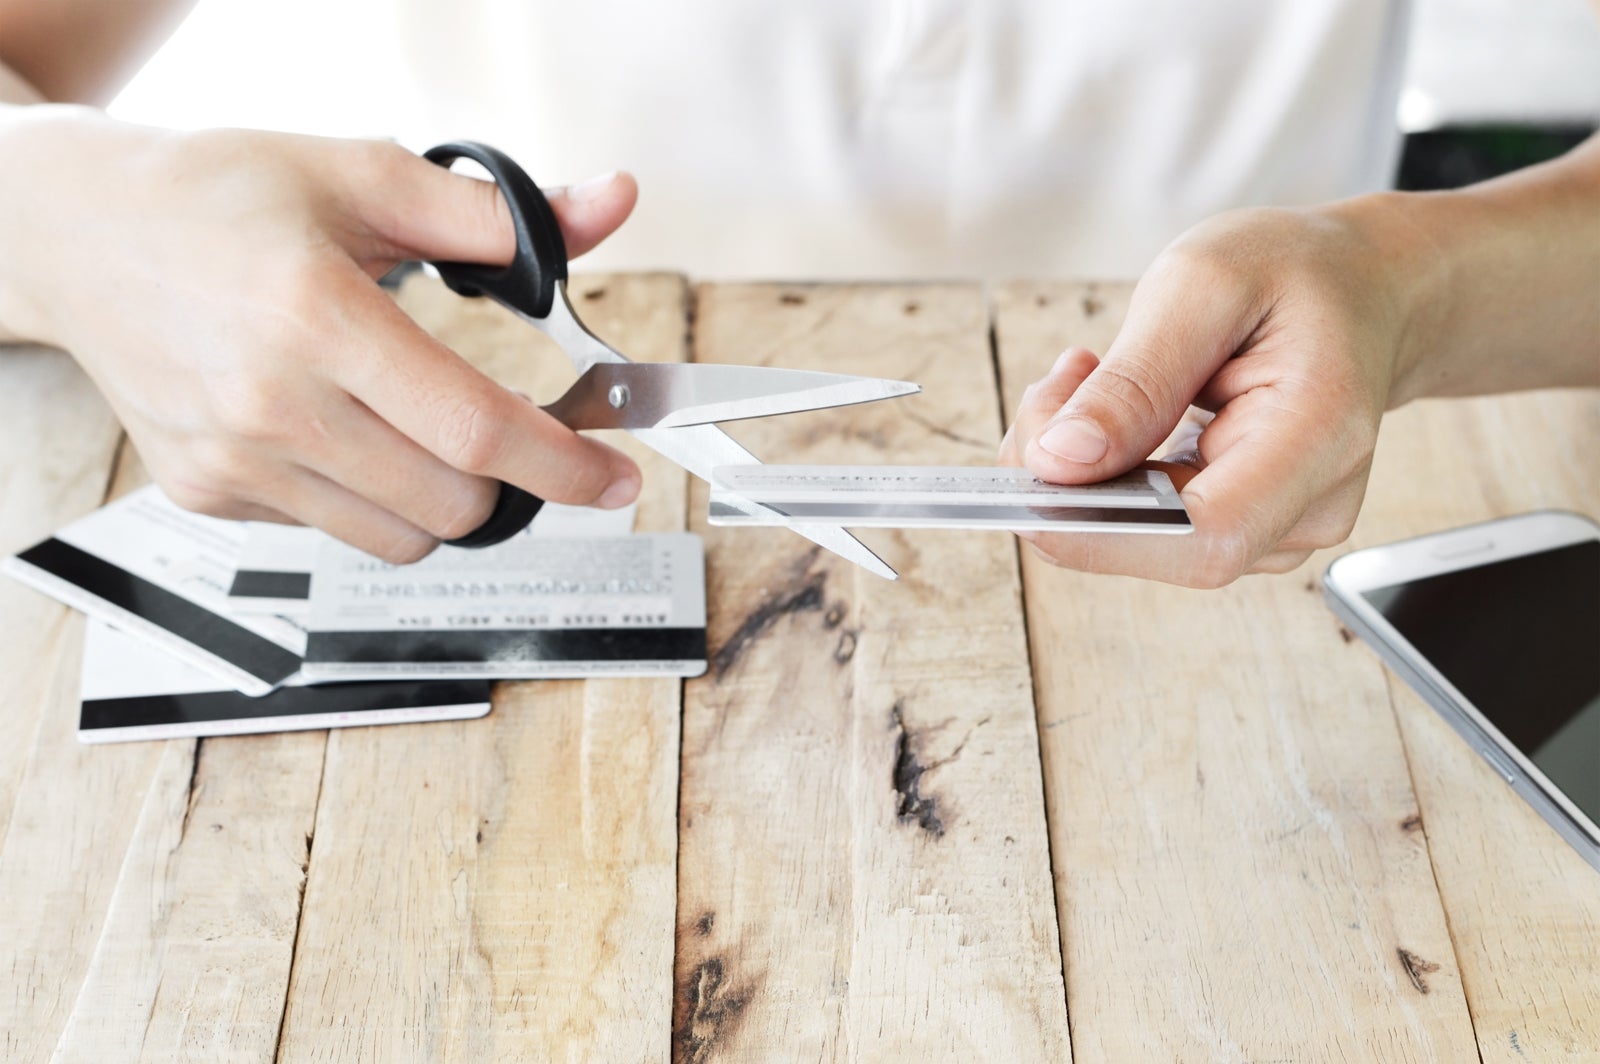 woman is cutting credit card with scissors